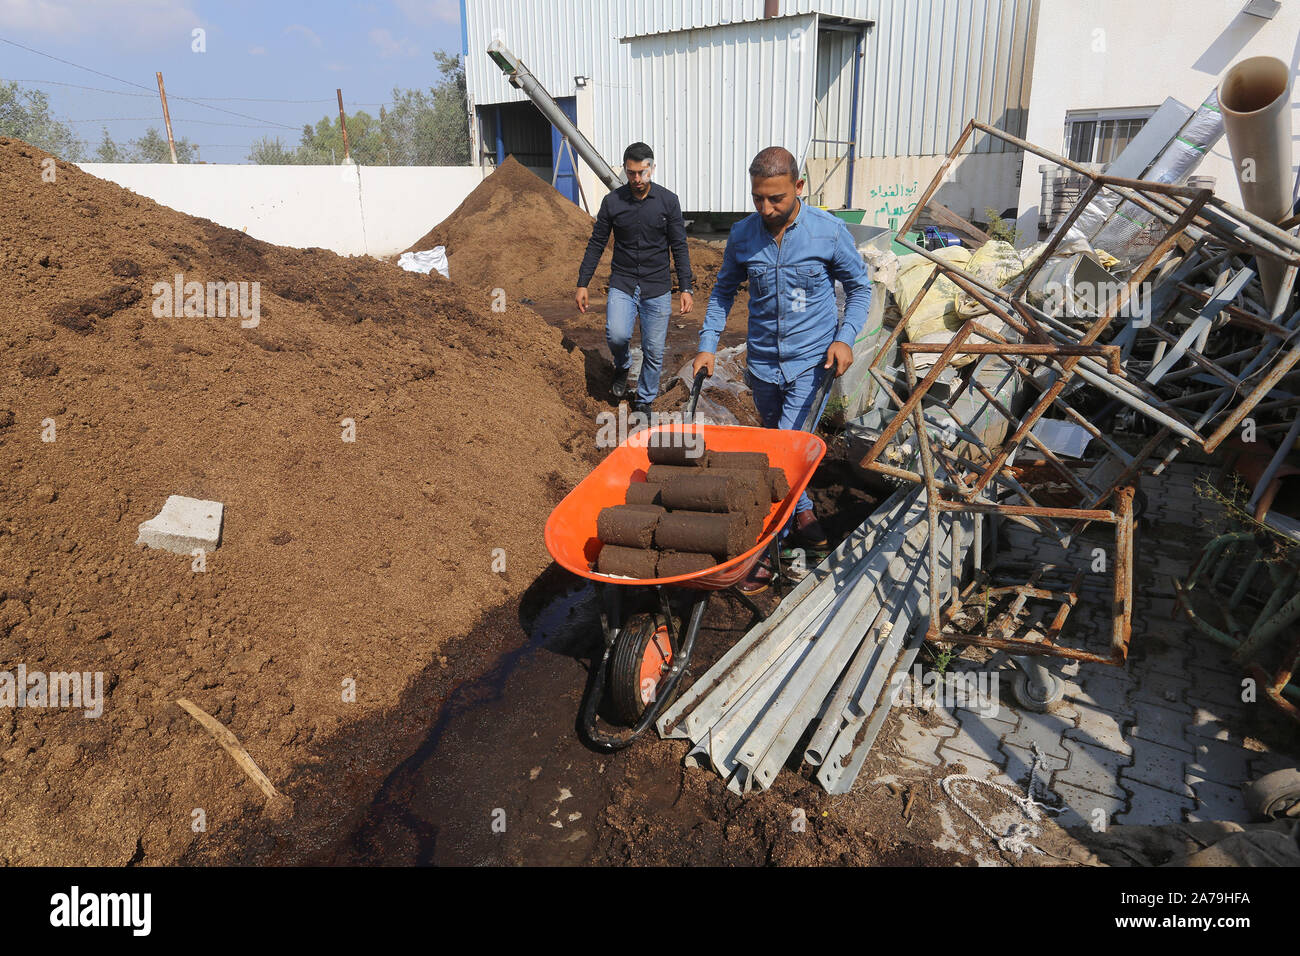 Palestinians make molds from olive pomace that is obtained from the olive oil extraction process and used as an energy source, in the Gaza Strip Stock Photo